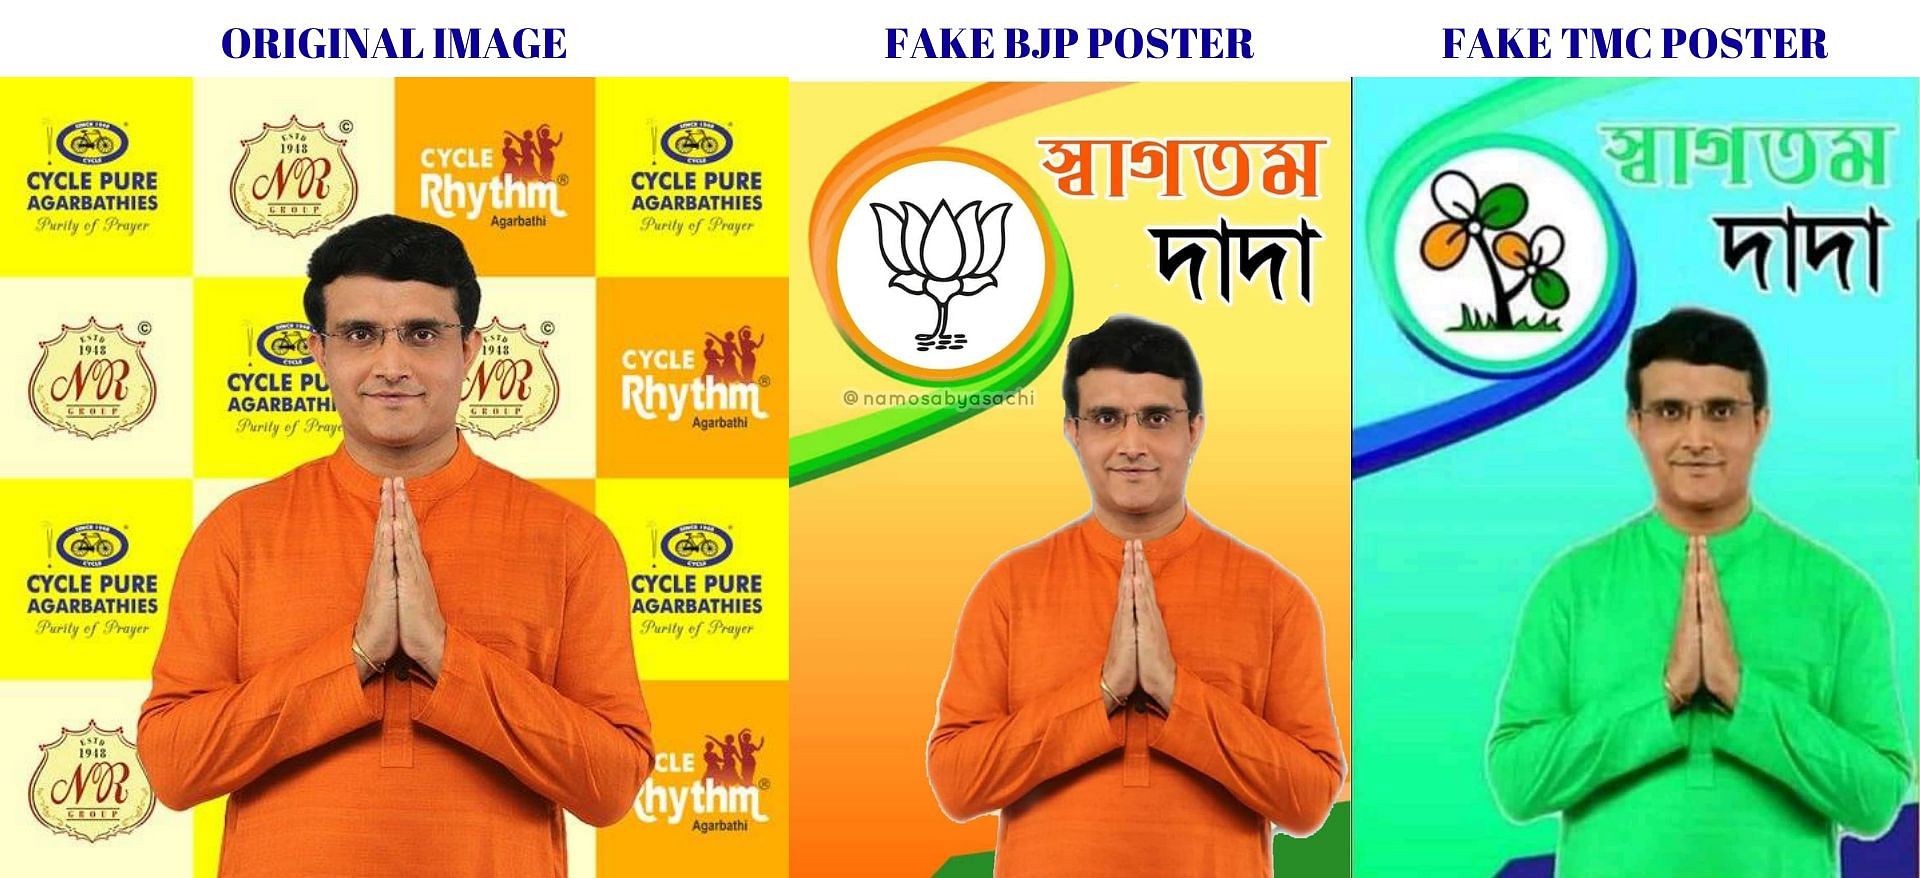 Fake BJP, TMC Posters of Sourav Ganguly Shared Ahead of WB Polls